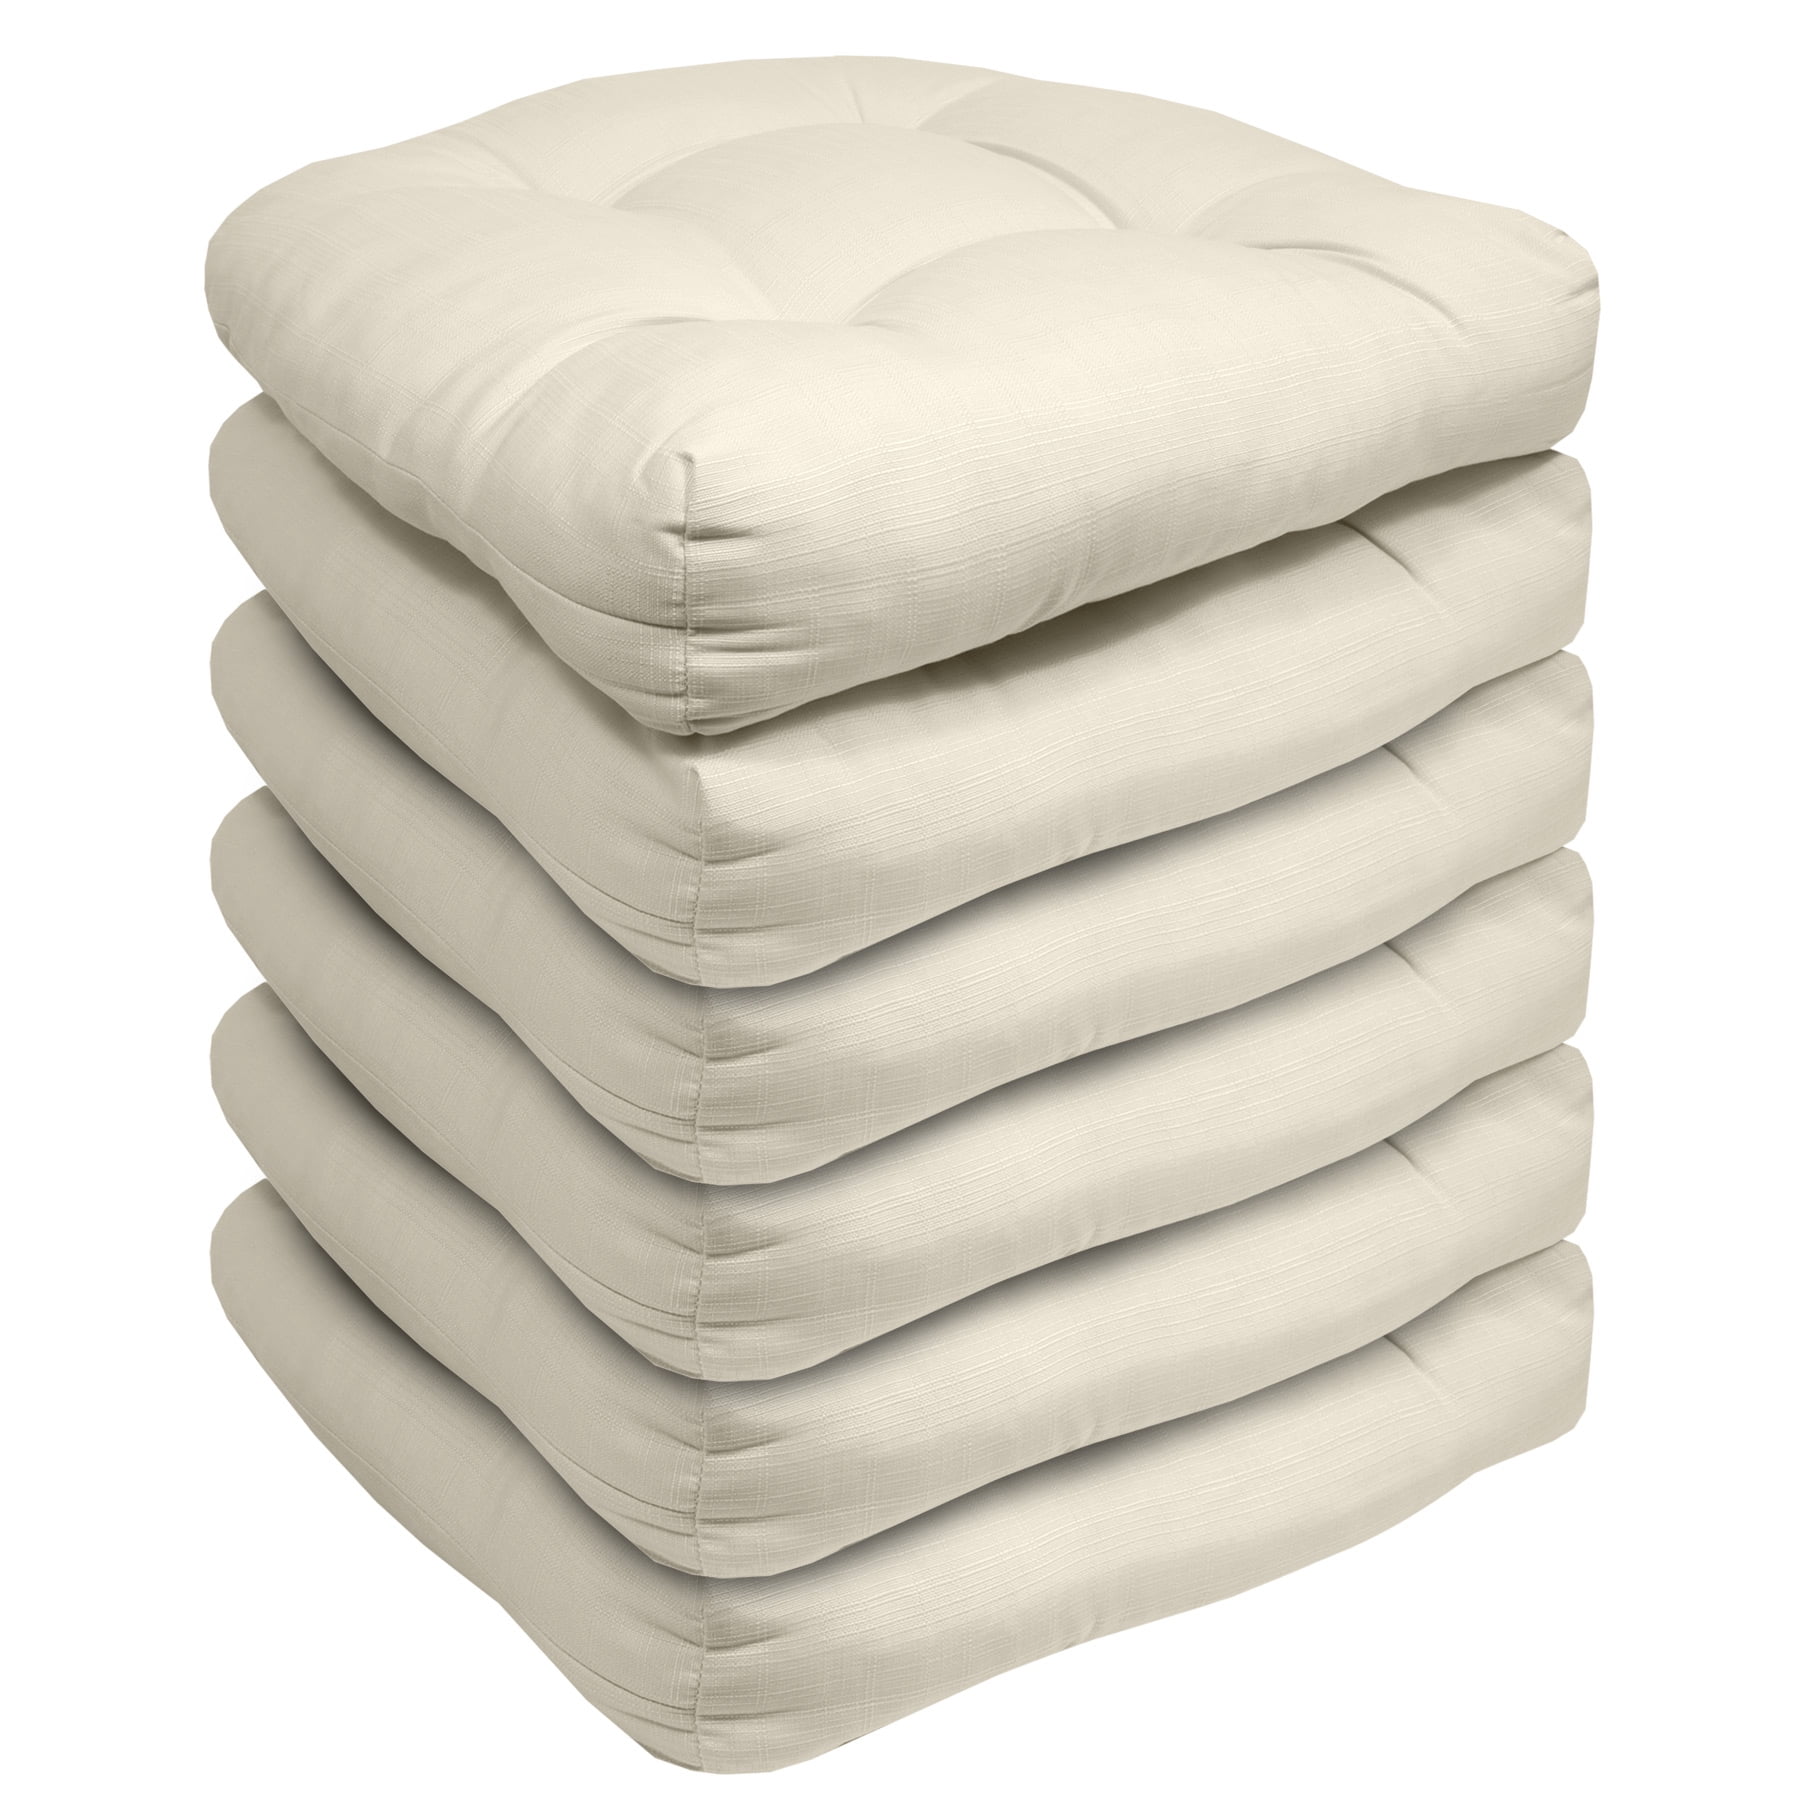 Sweet Home Collection Patio Cushions Outdoor Chair Pads Thick Fiber Fill Tufted 19 x 19 Seat Cover, Cream, 6 Pack